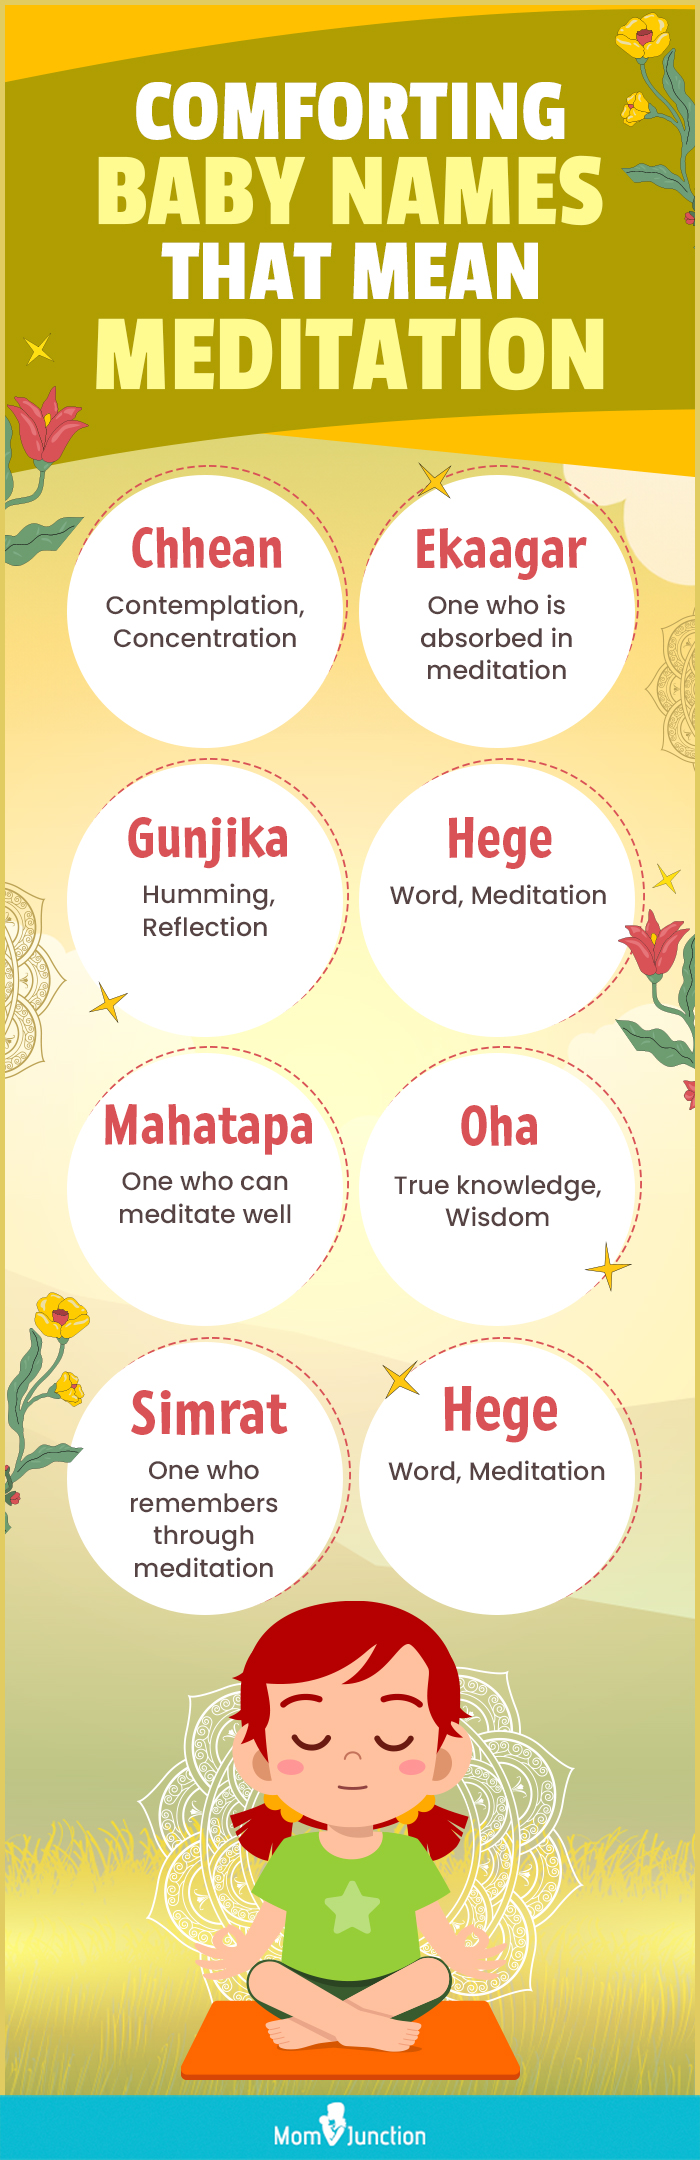 comforting baby names that mean meditation (infographic)